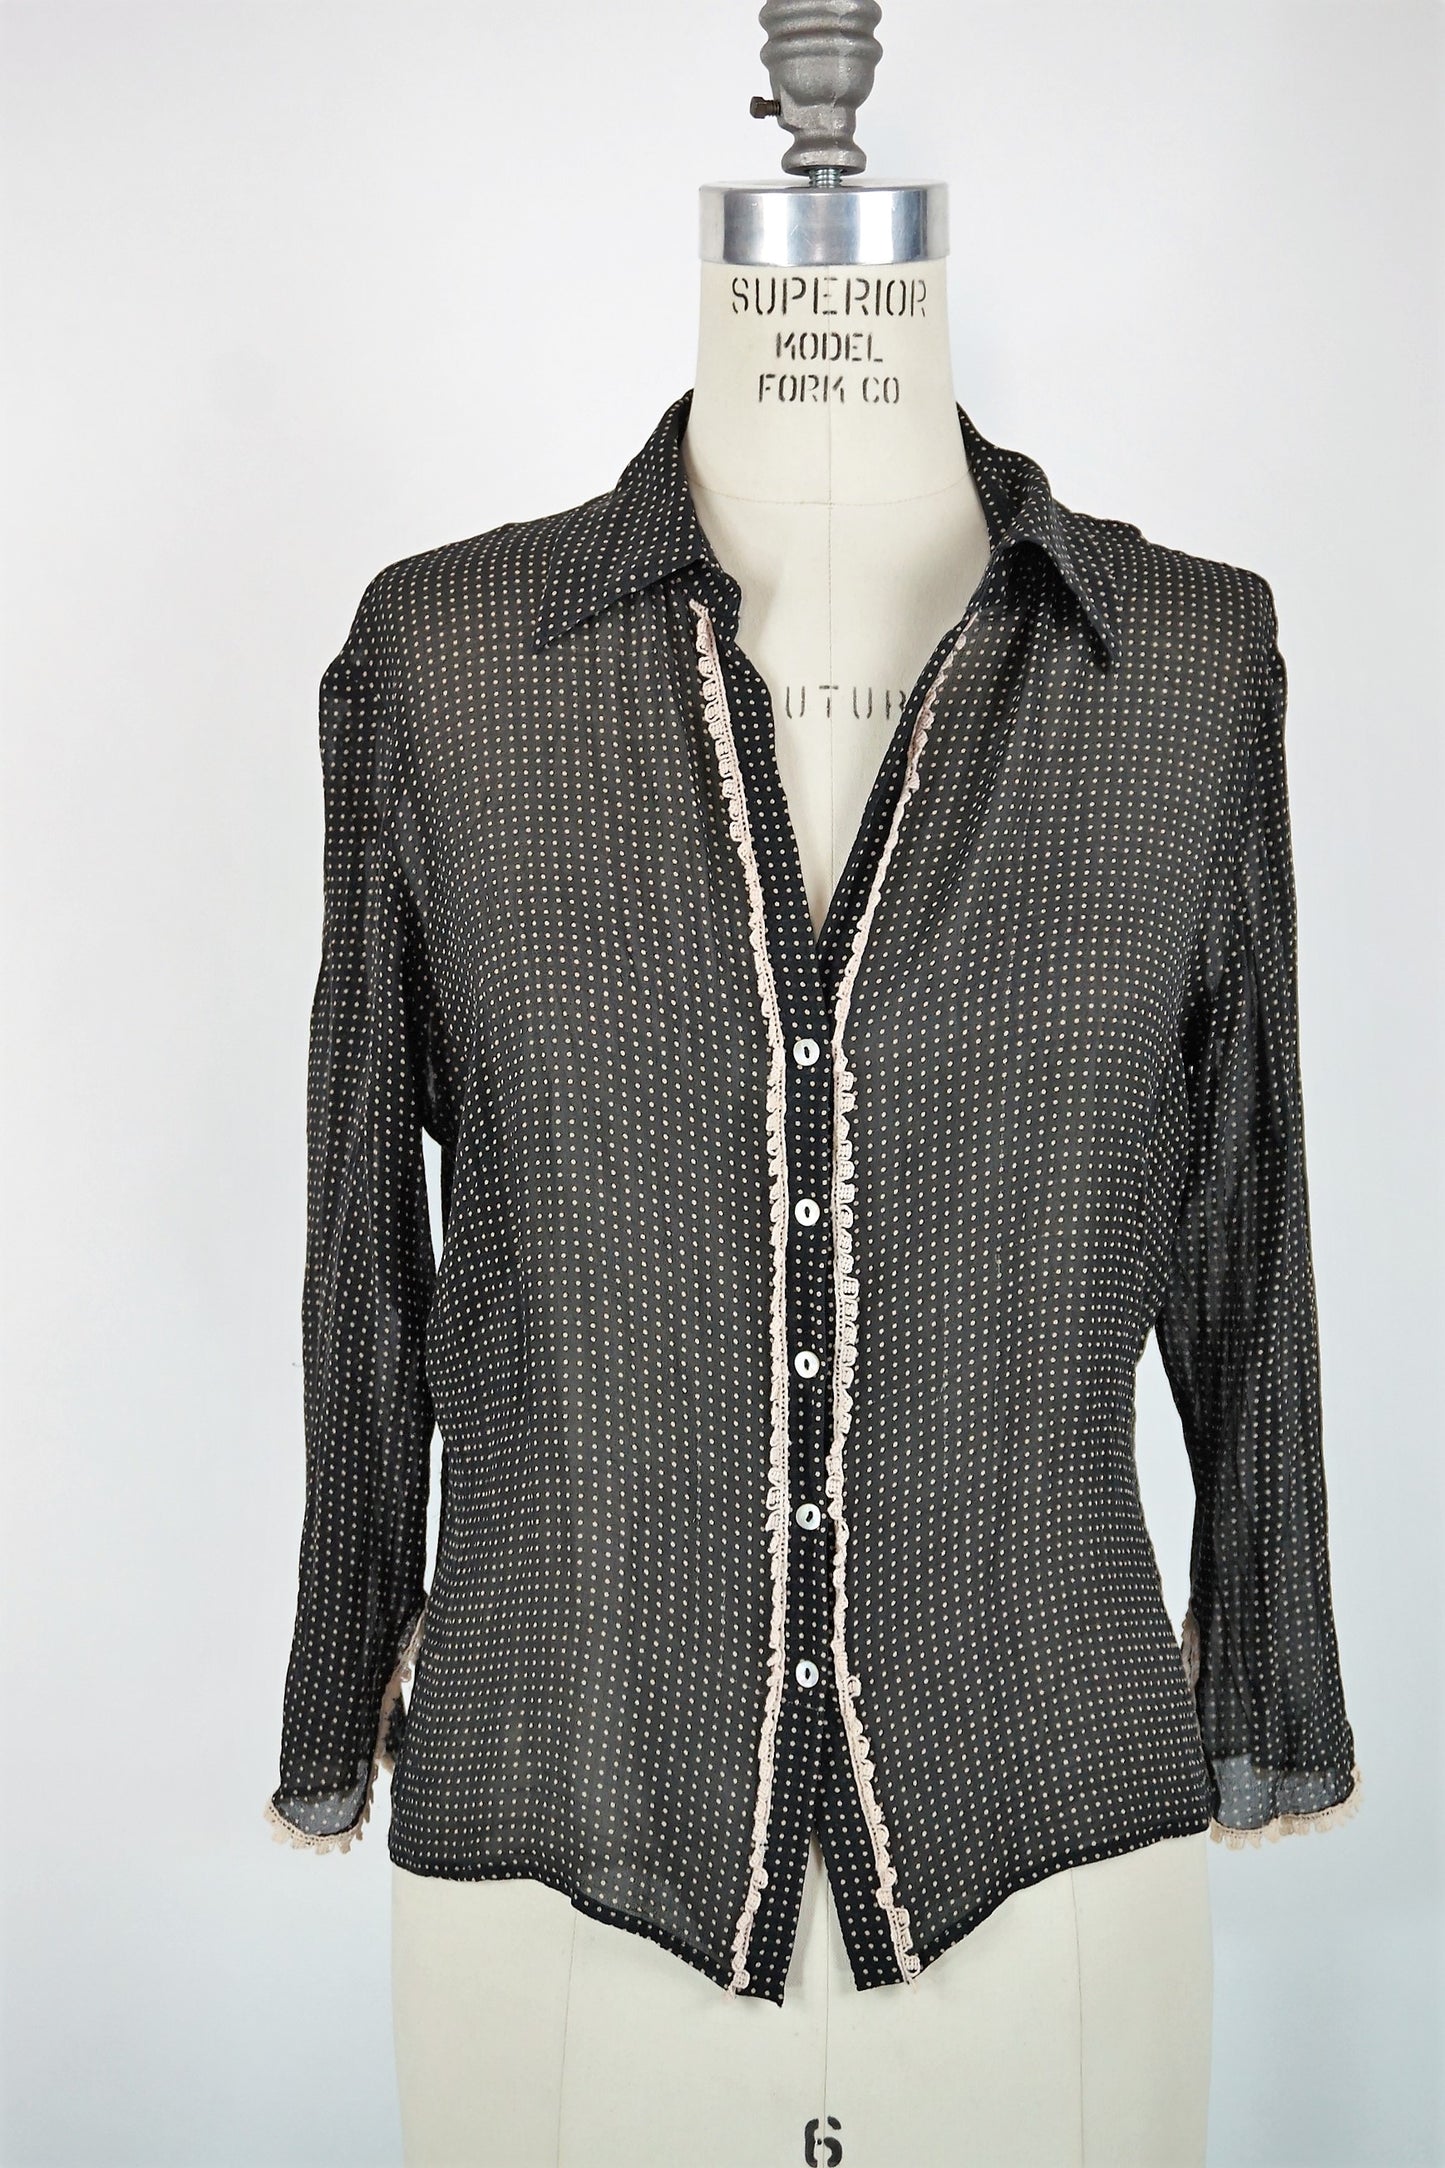 Black and ivory polkadot top, 40s style